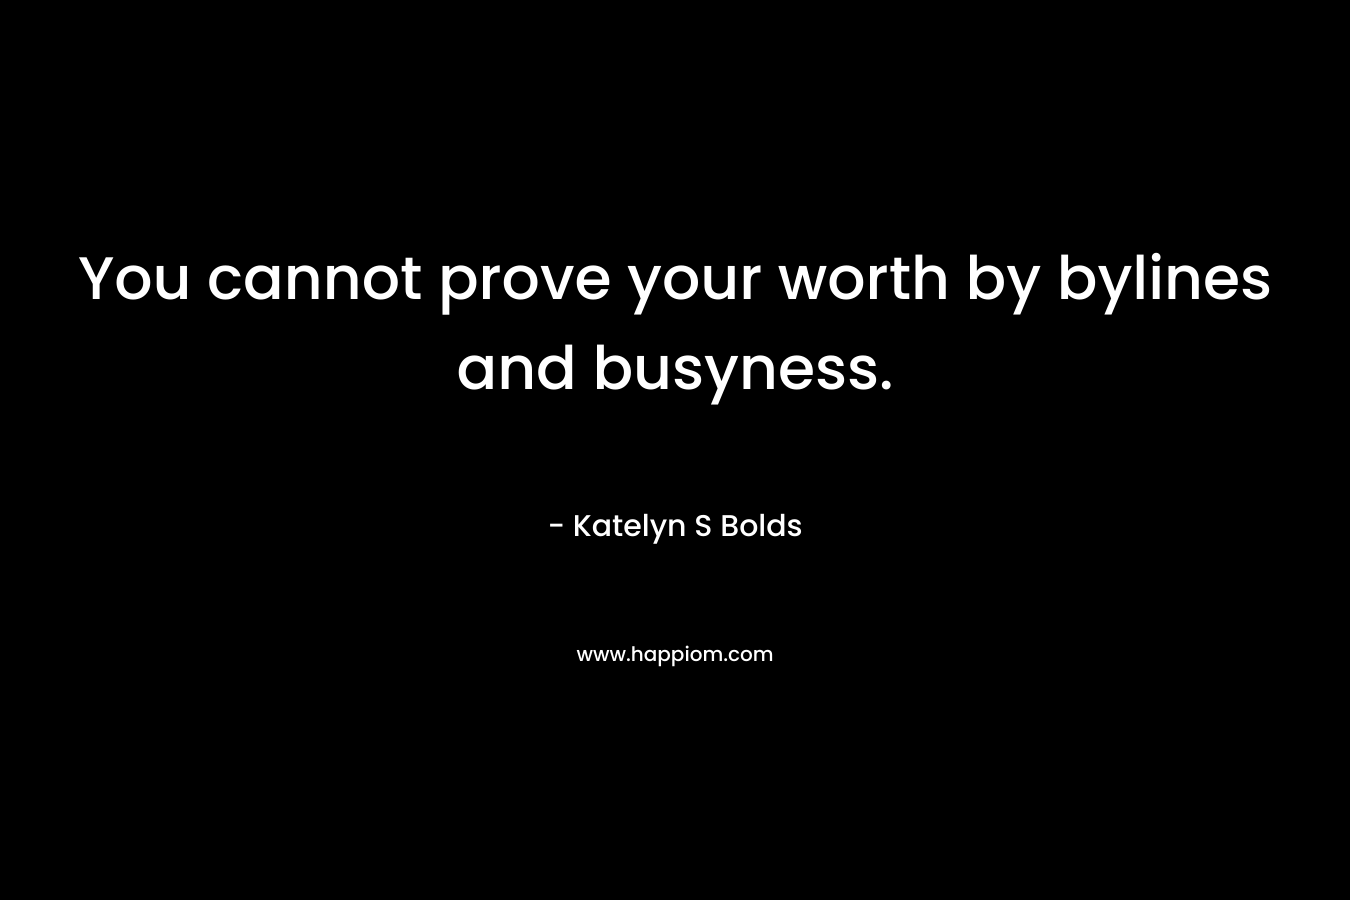 You cannot prove your worth by bylines and busyness. – Katelyn S Bolds